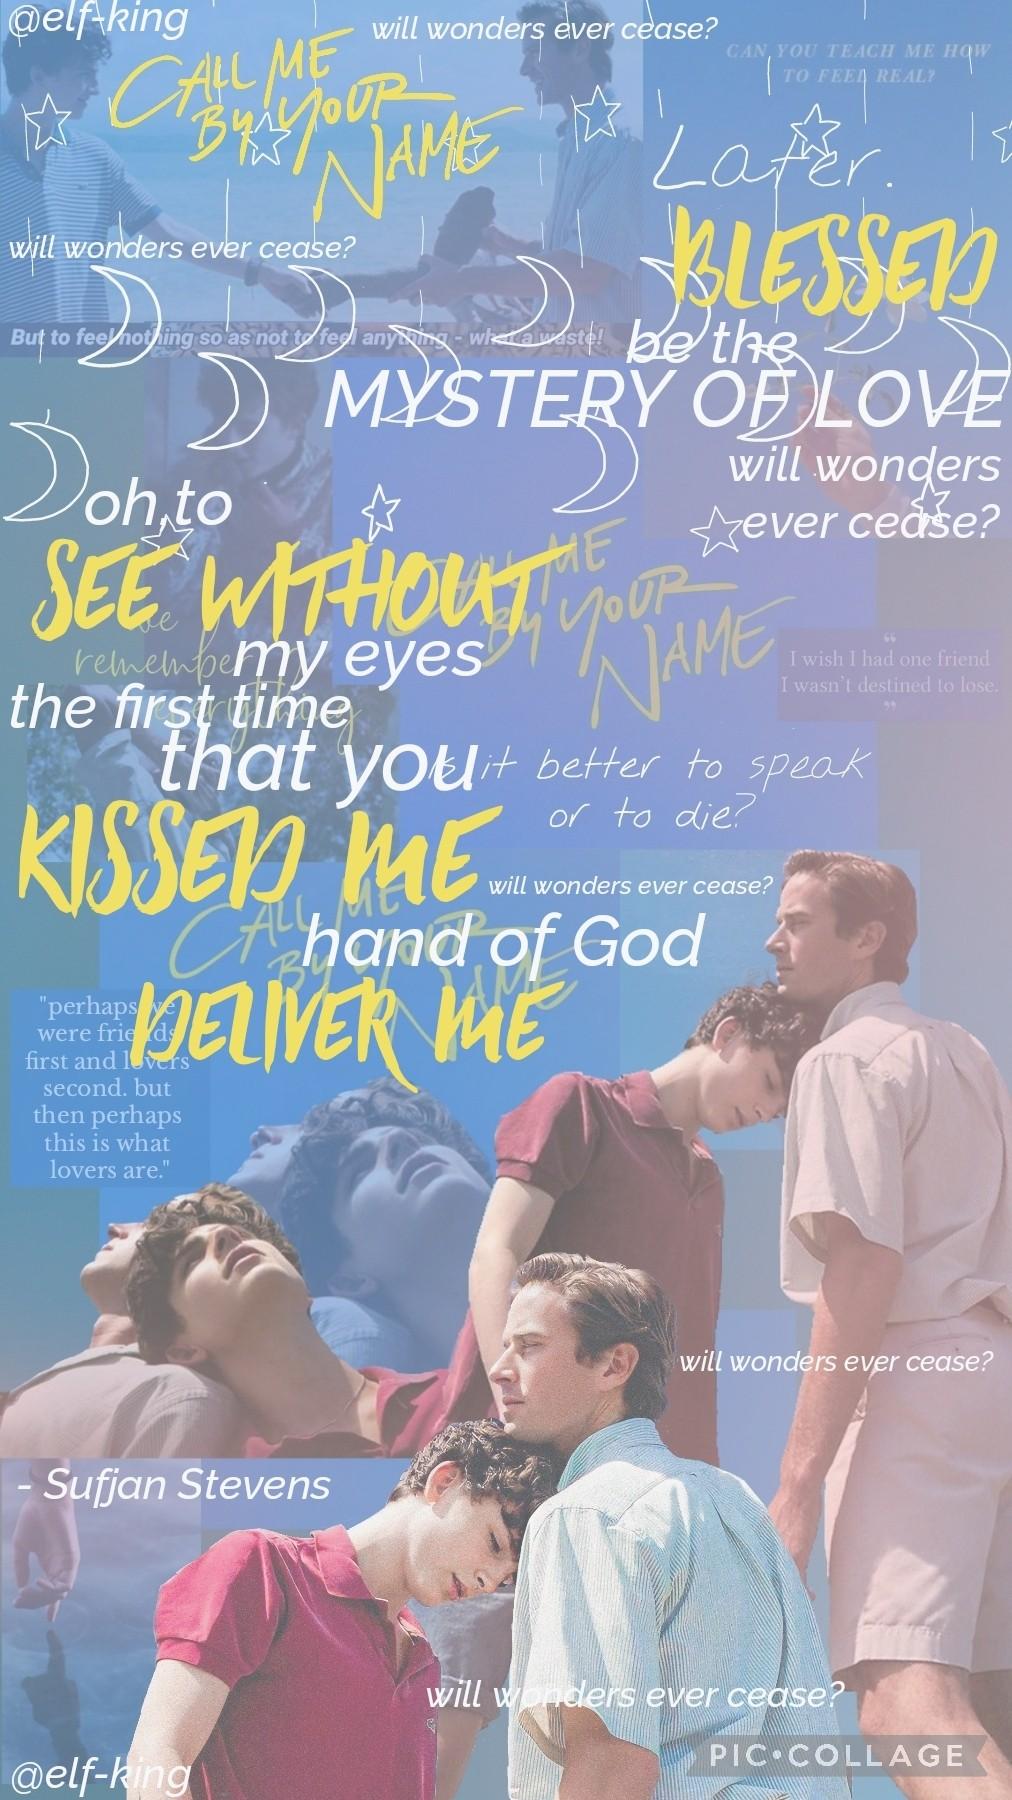 SECOND WEEK OF SCHOOL BABYYY
did I make an entire collage based on a song written for a movie I've never even seen? yes. yes I did. I'm too tired to have regrets right now though.